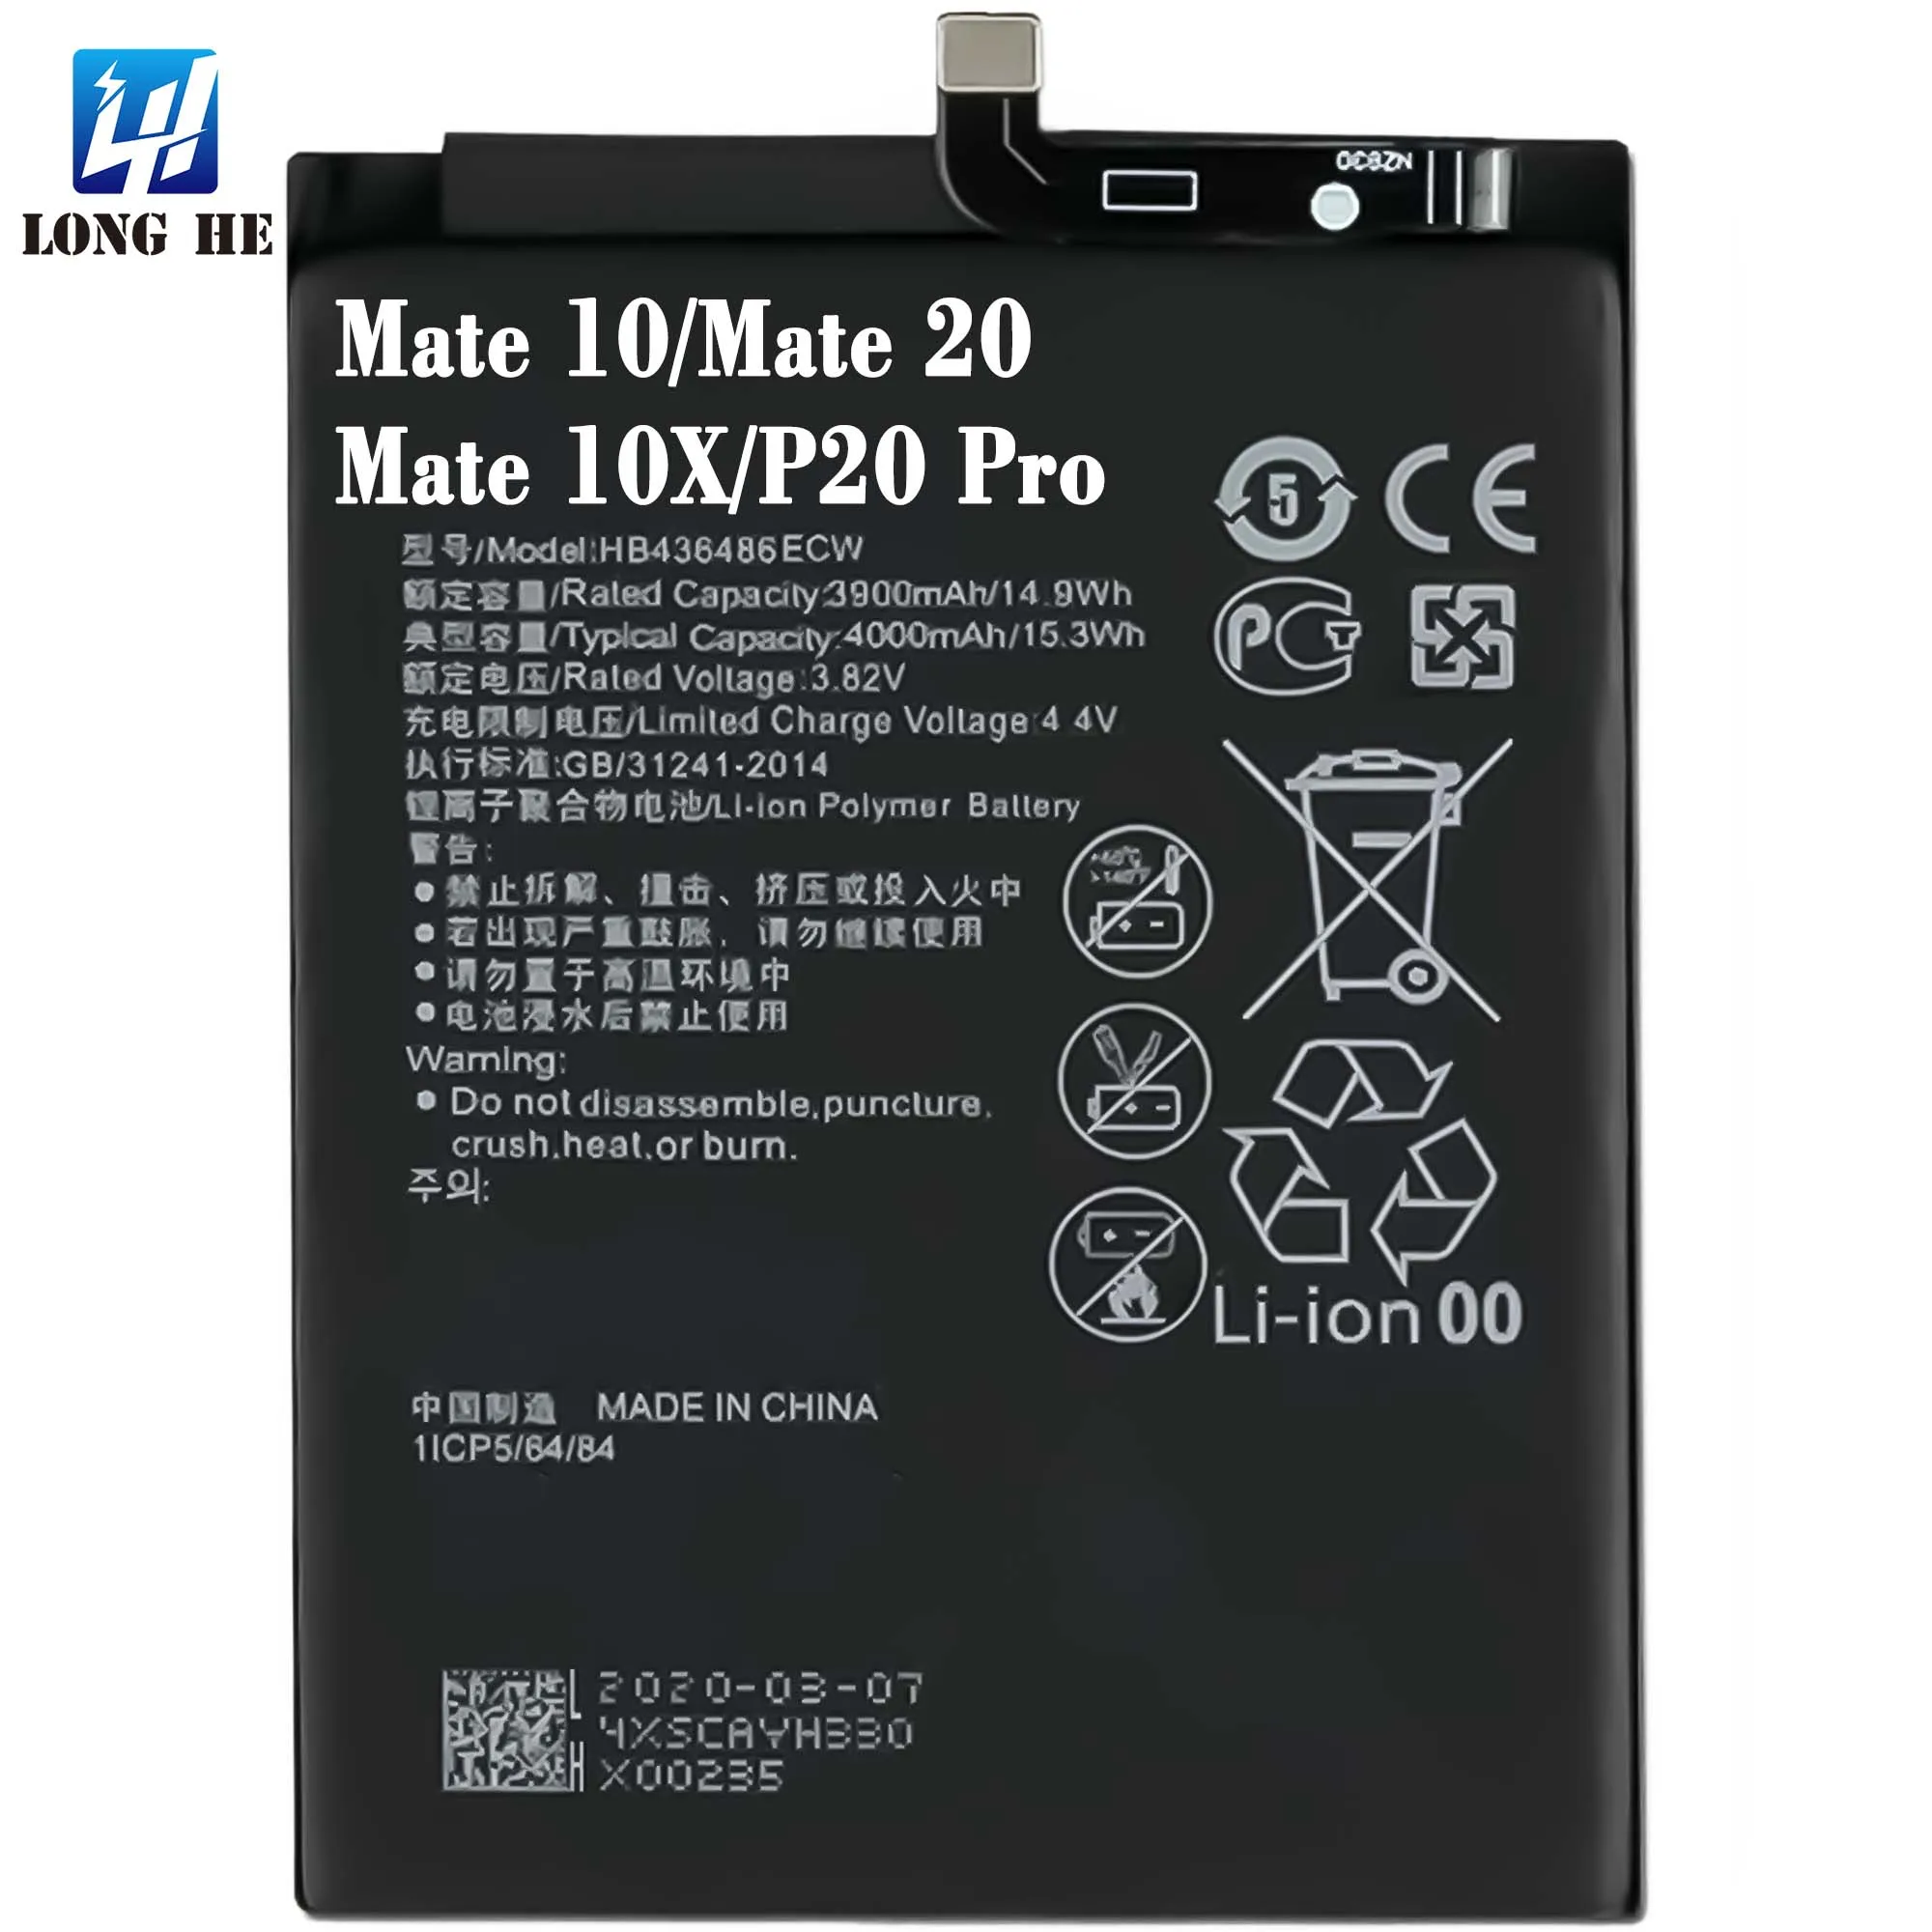 

HB436486ECW Mate10 Pro Mate10X Mate 20 P20 Pro Battery for Huawei Mate 10